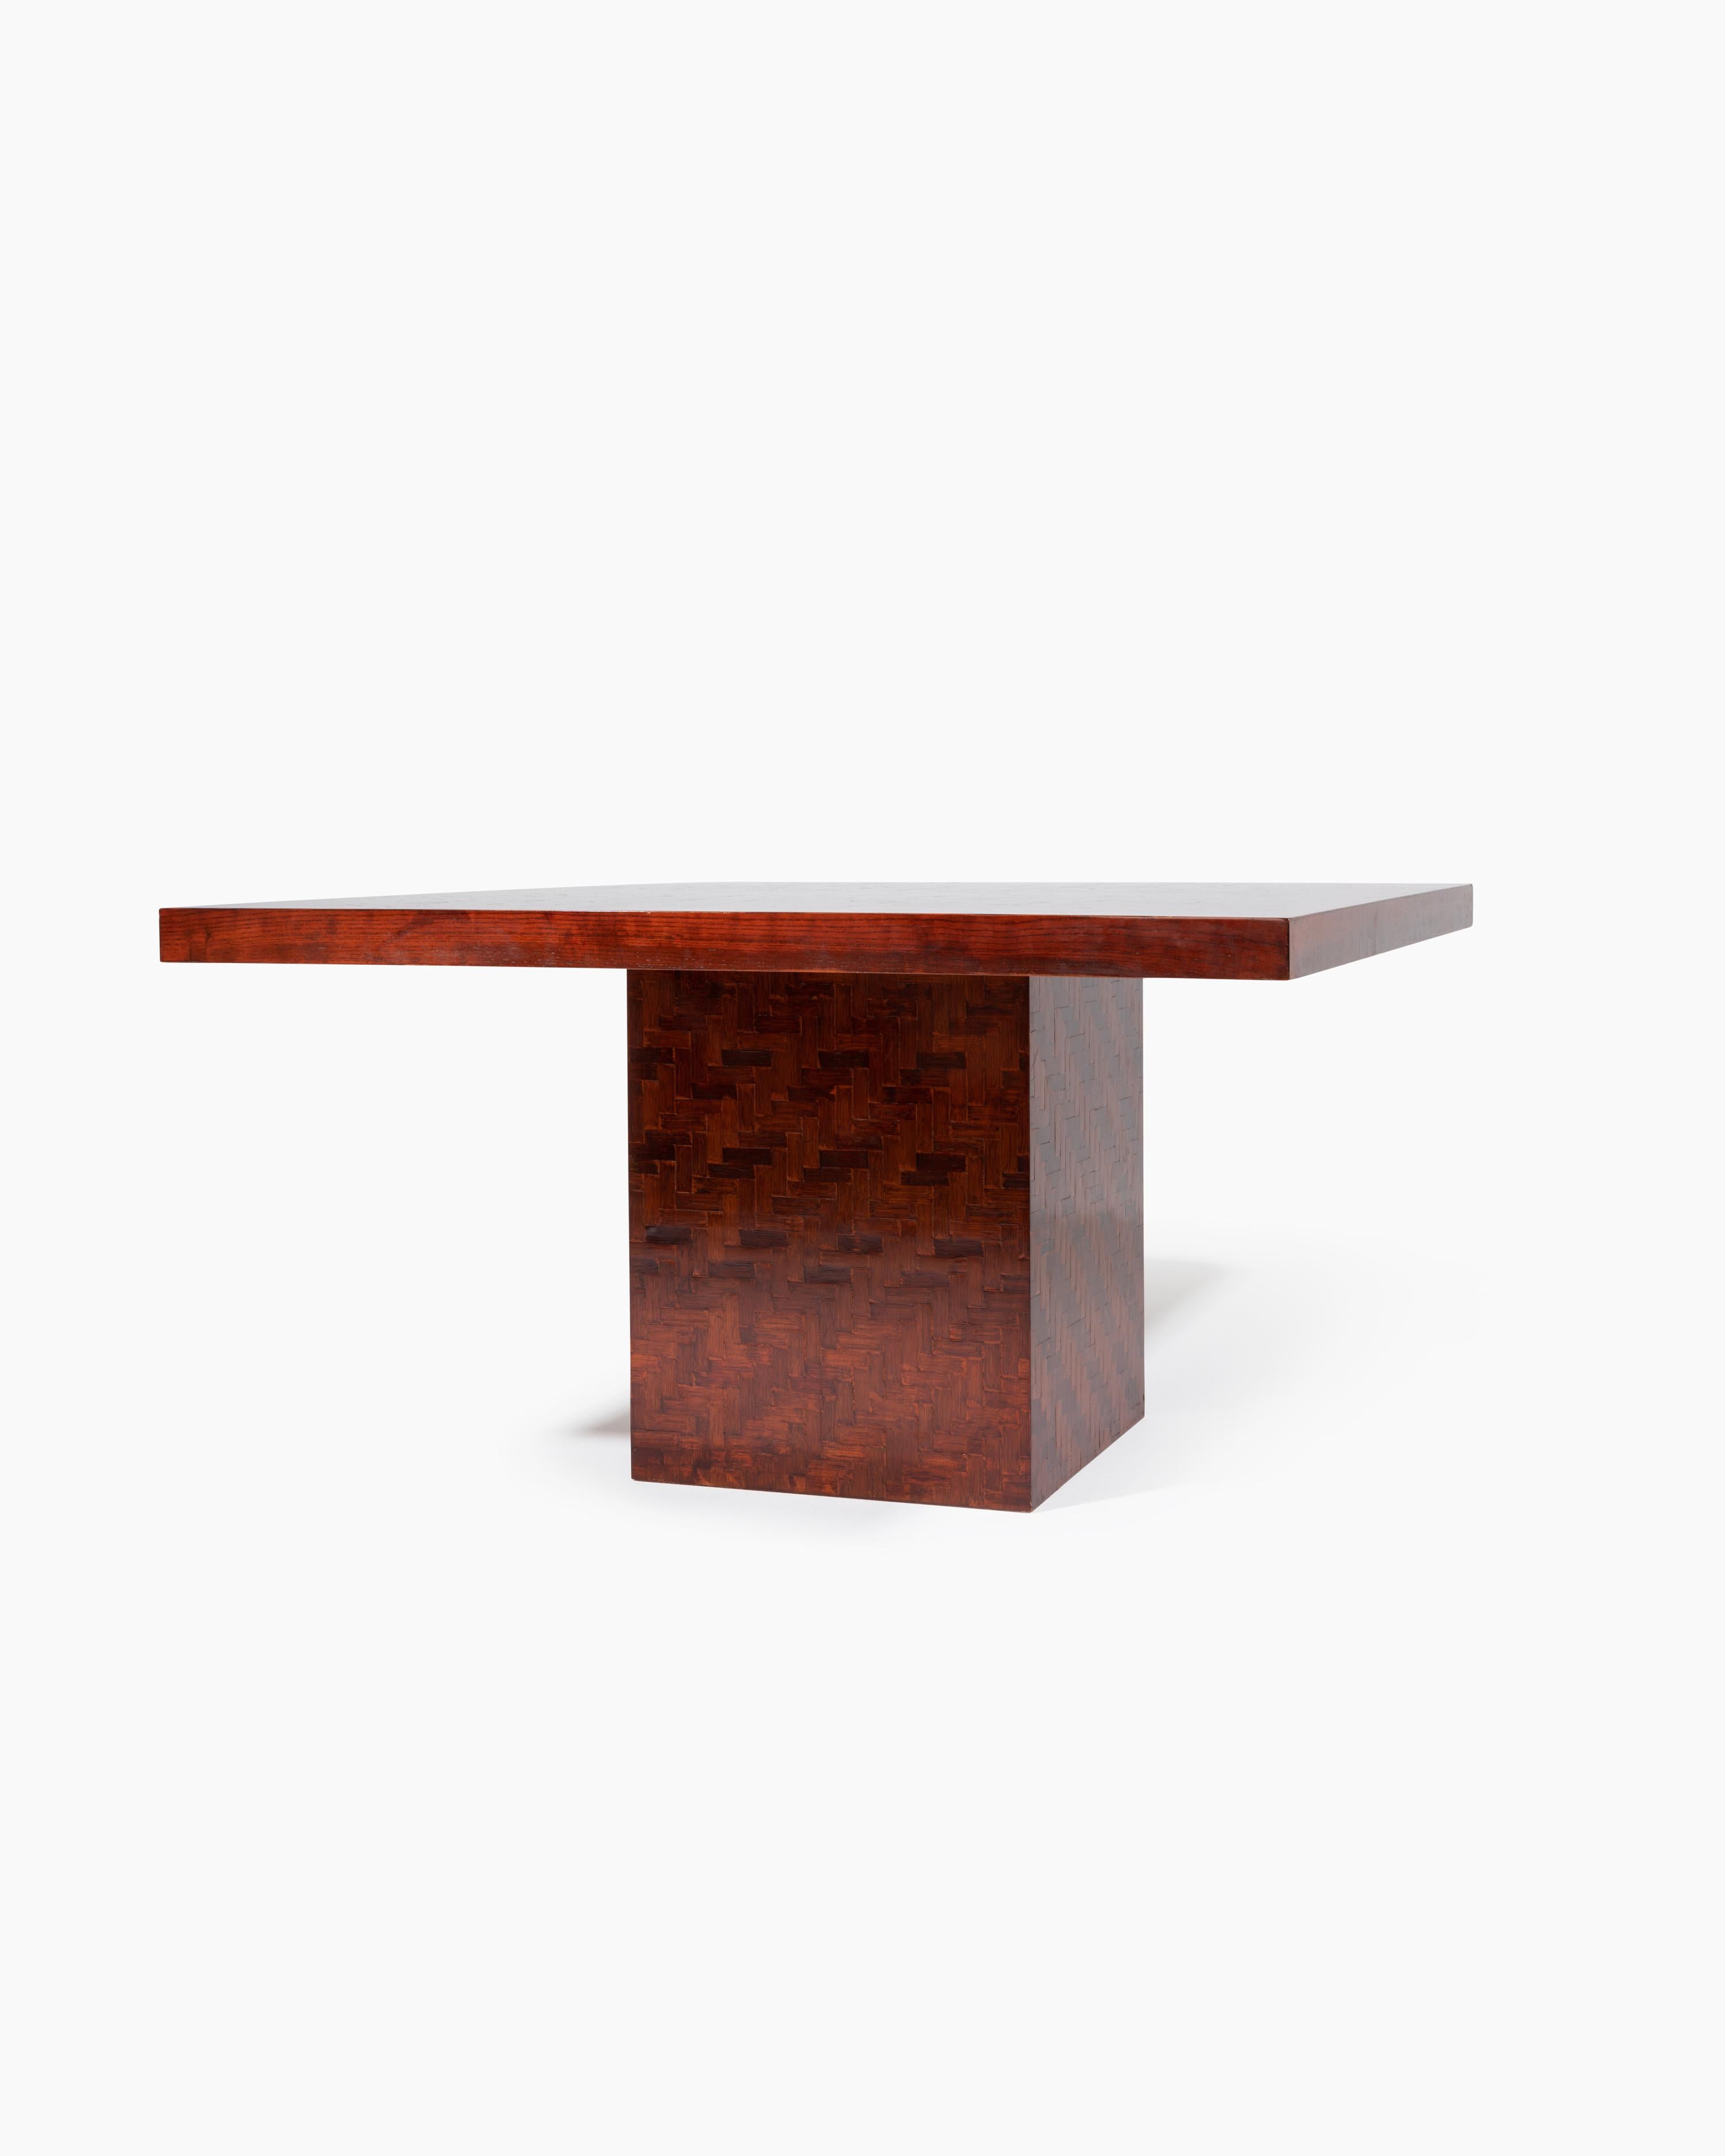 Square Dining Table for Turri with Dyed Banana Leaf Weaving ontop of Wood, 1970s In Good Condition For Sale In Beverly Hills, CA